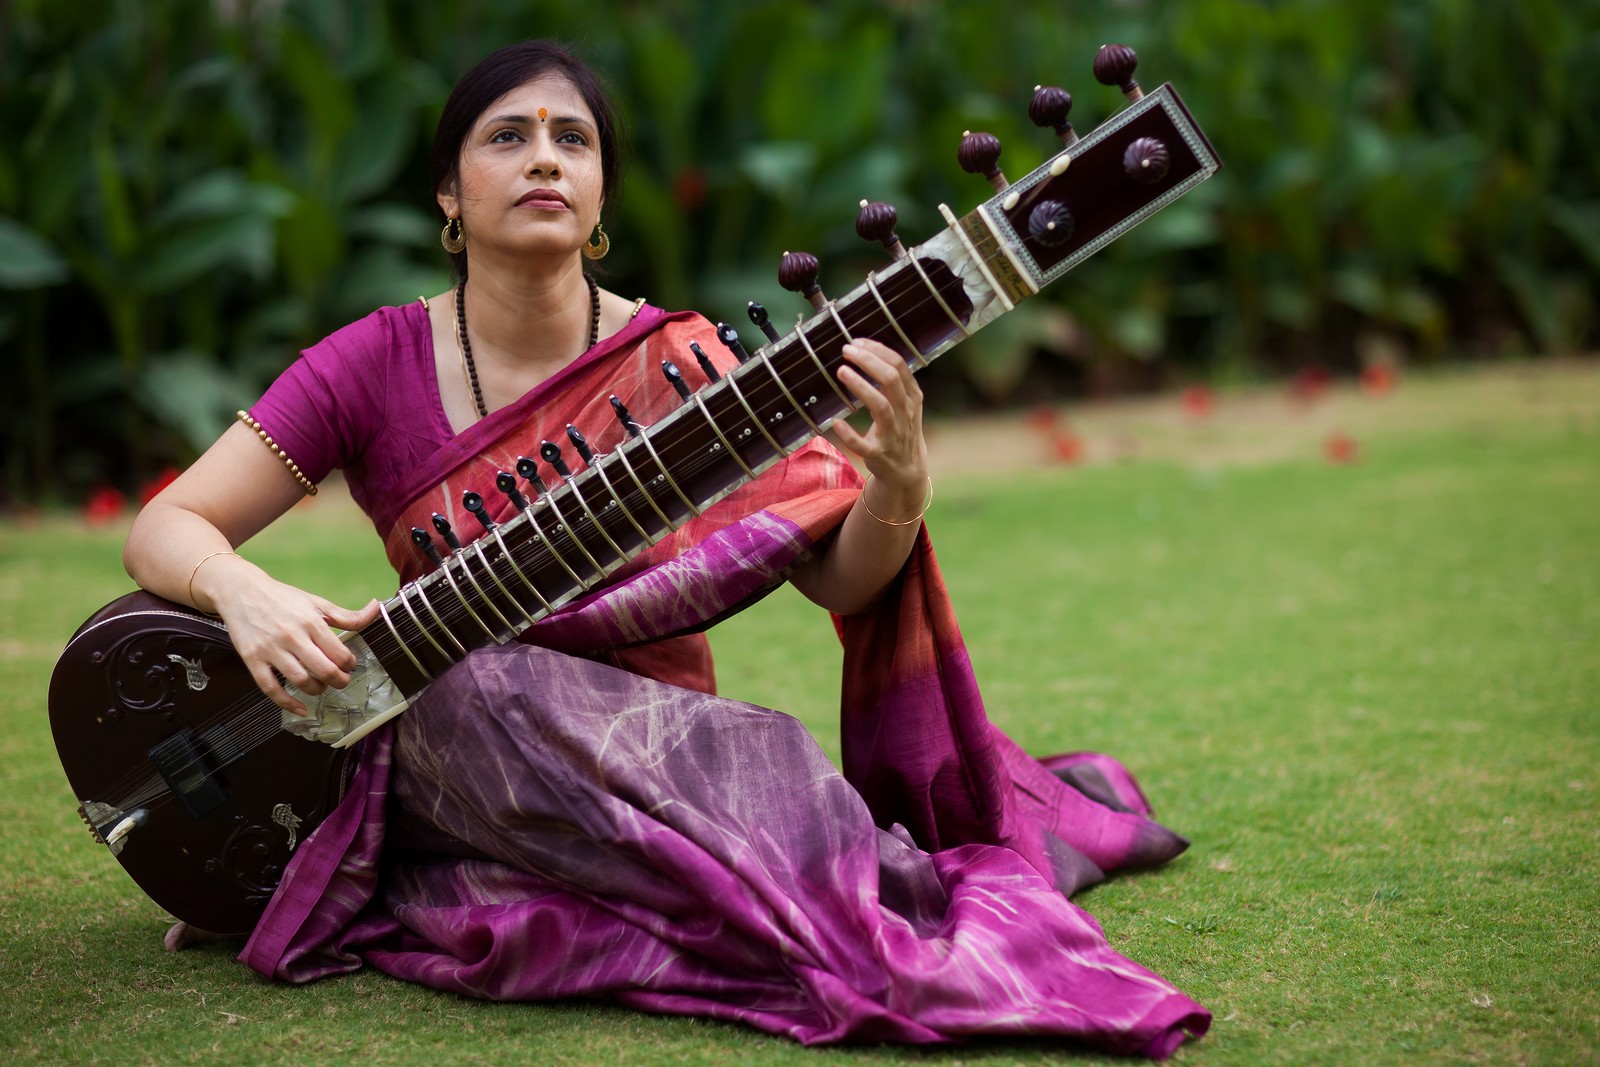 Soulful sitar concert with India's Anupama Bhagwat at St George's